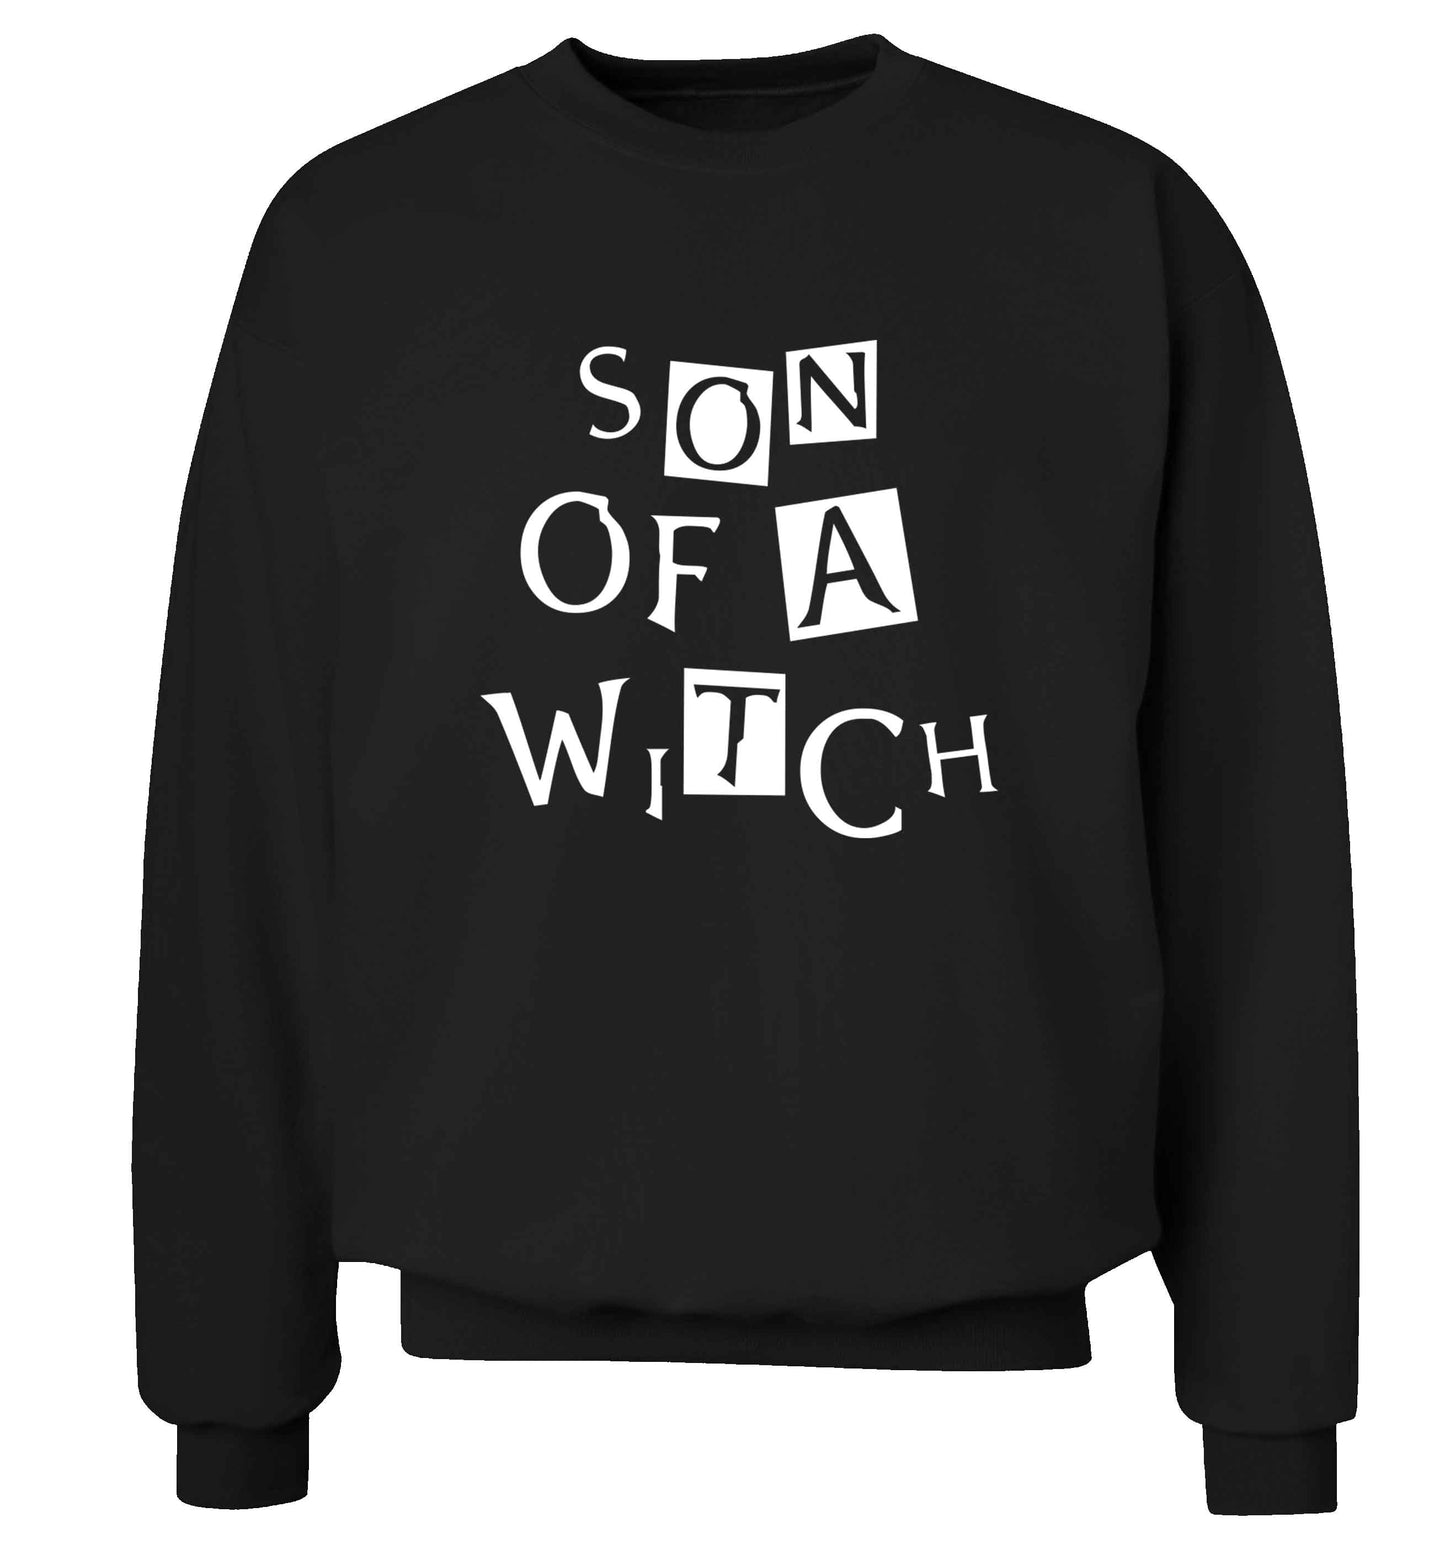 Son of a witch adult's unisex black sweater 2XL